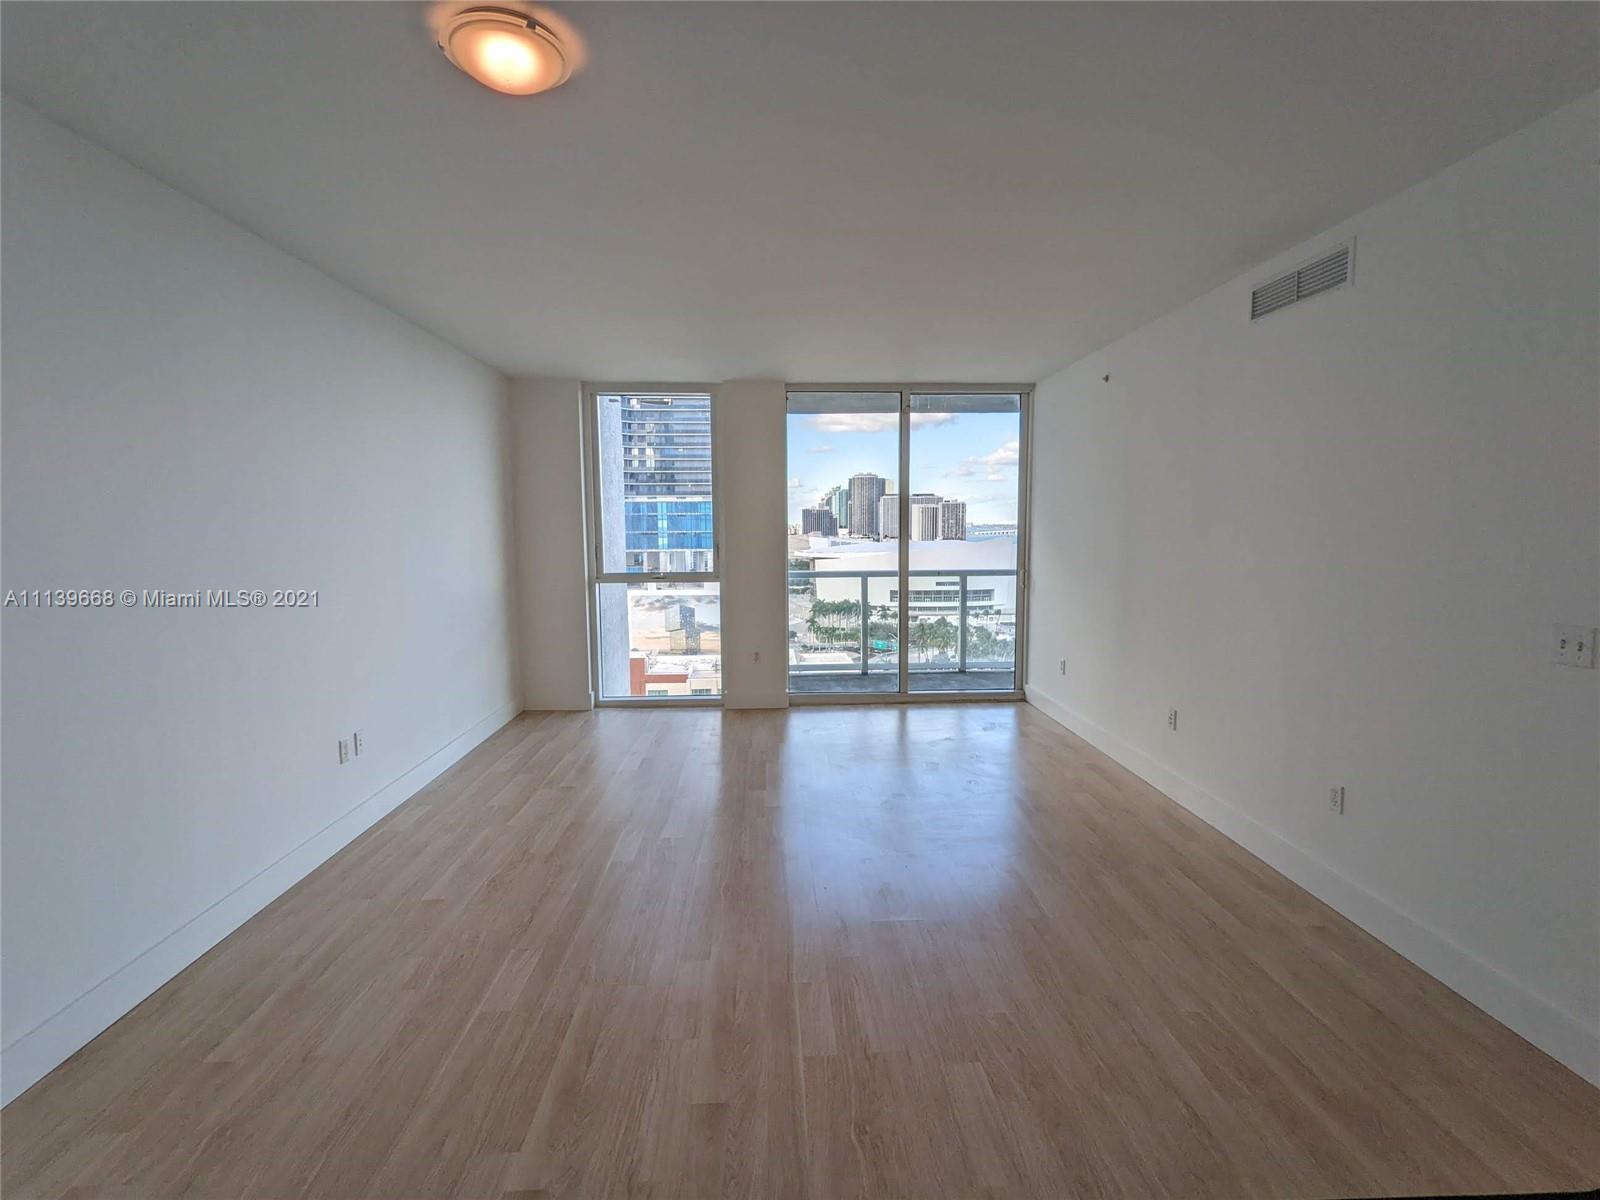 1BD/1BA condo with beautiful Biscayne Bay & Downtown views. Unit features master bedroom with walk-i